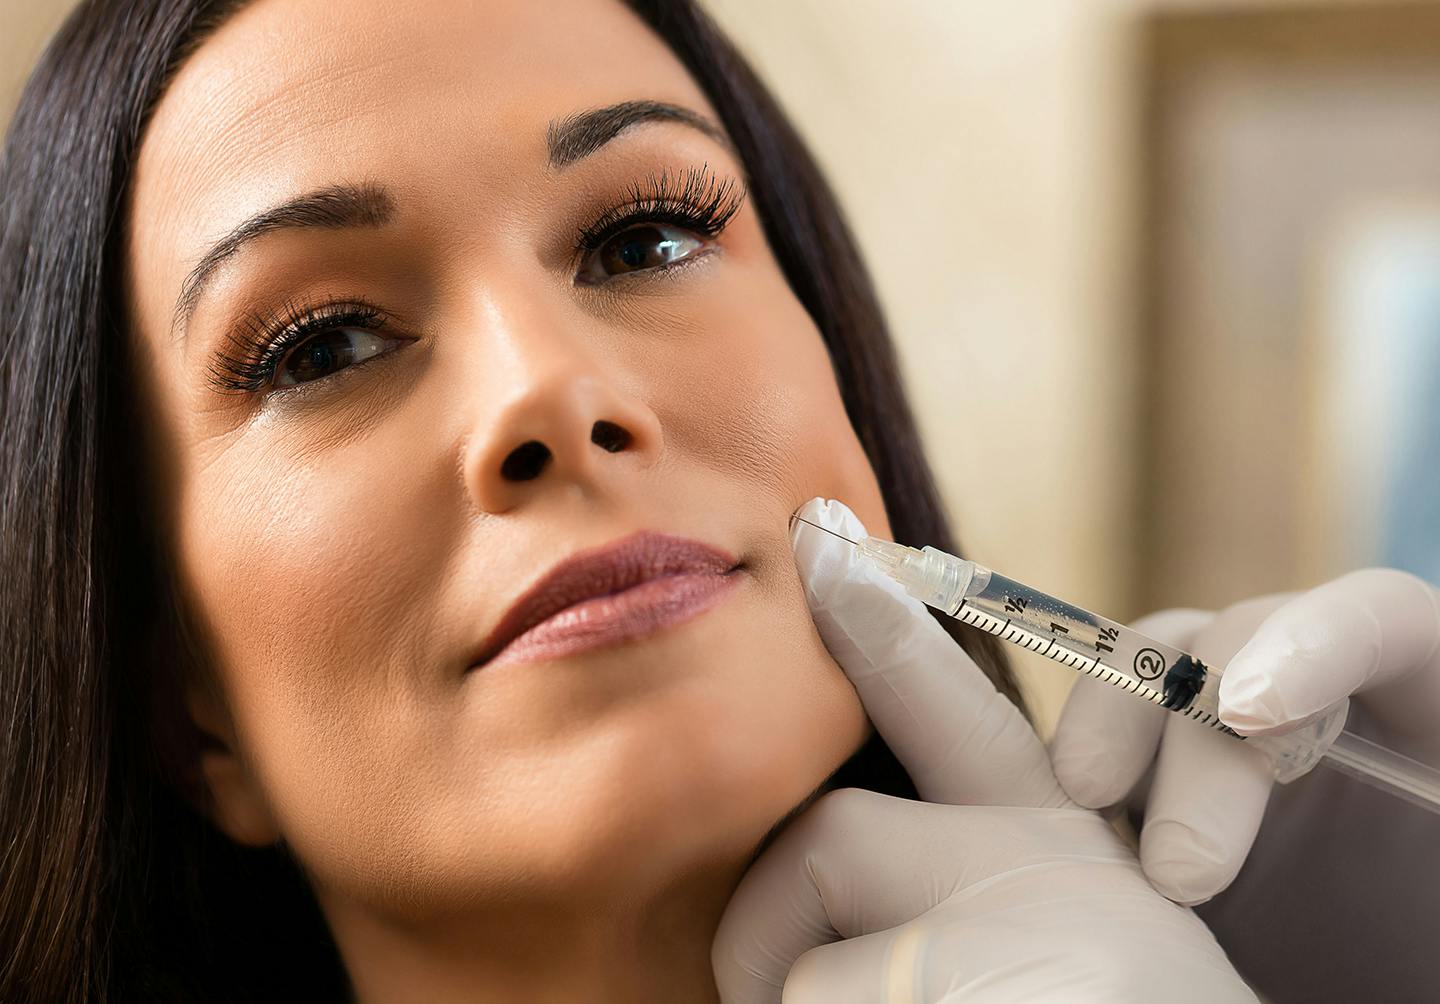 Botox Injection Tampa  Cosmetic Injections Tampa Bay Area